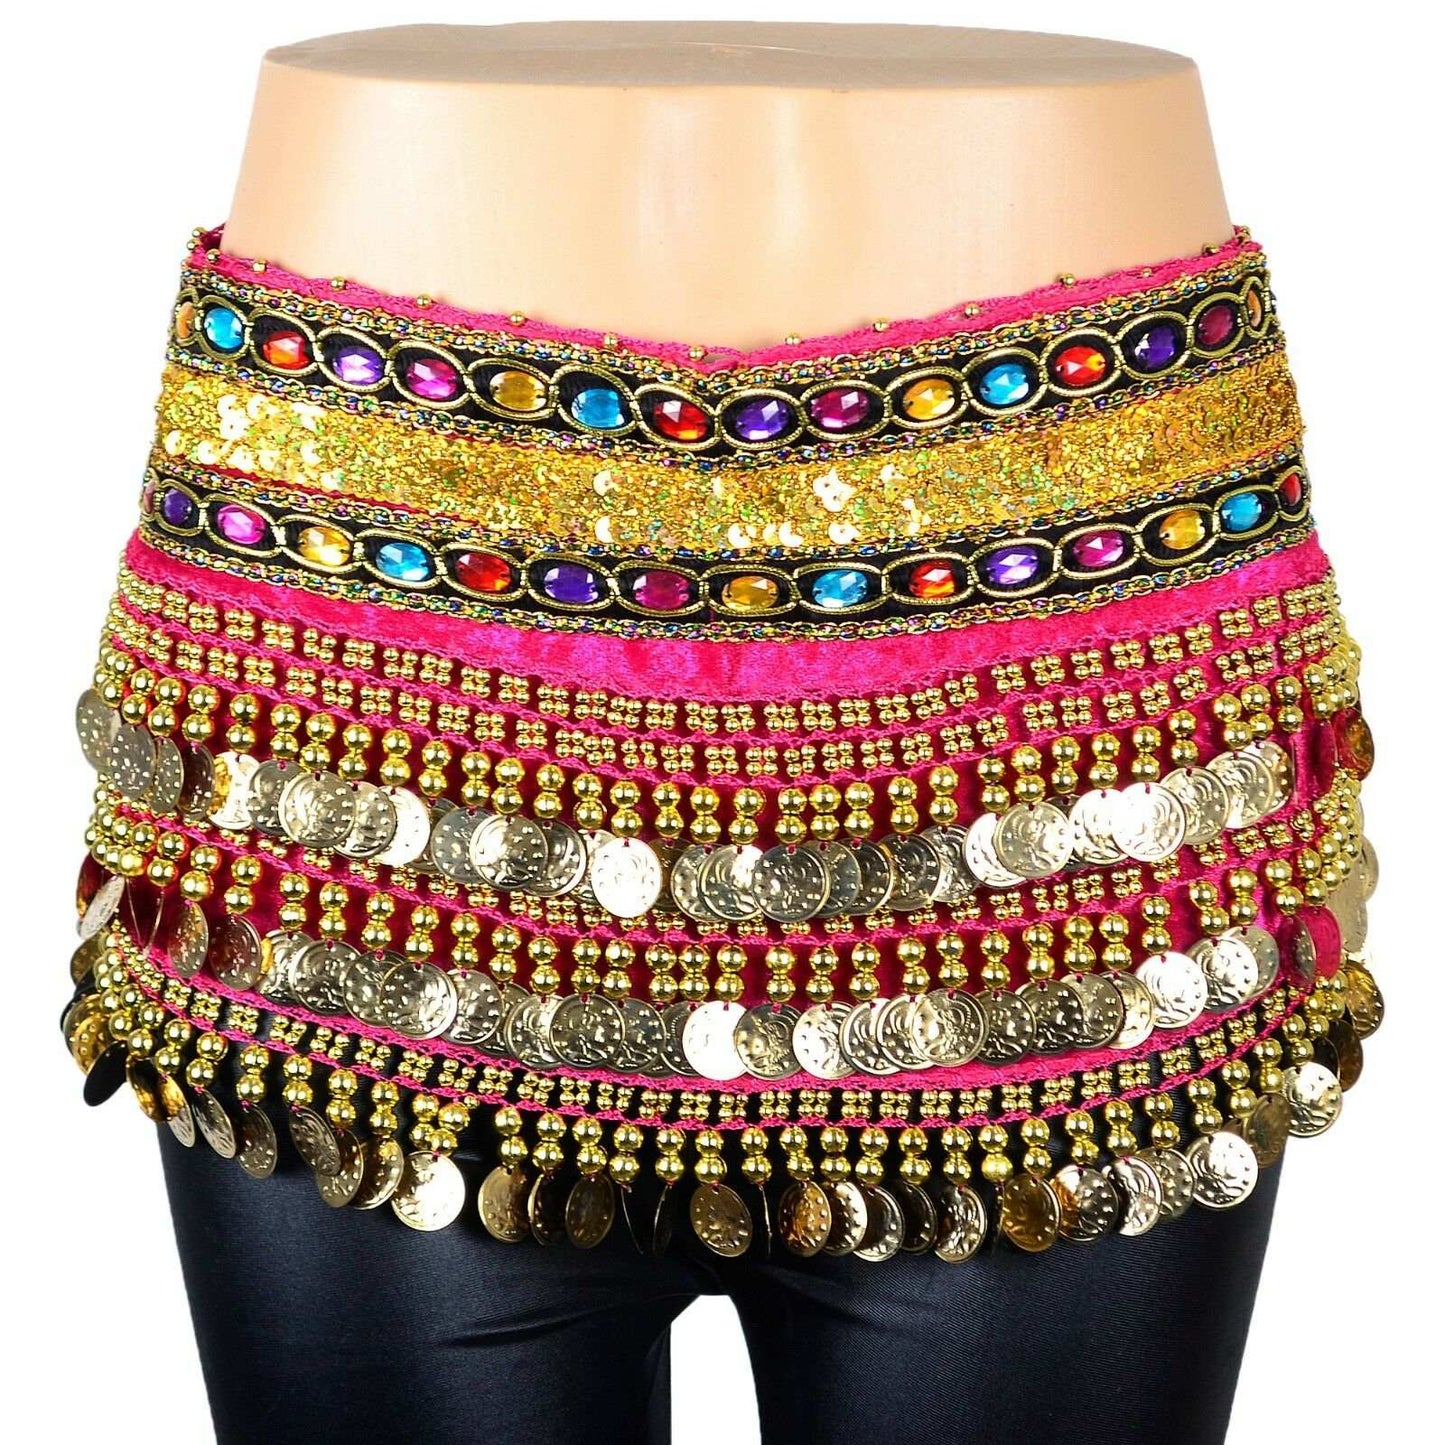 Hot Pink and Gold Coin Belt